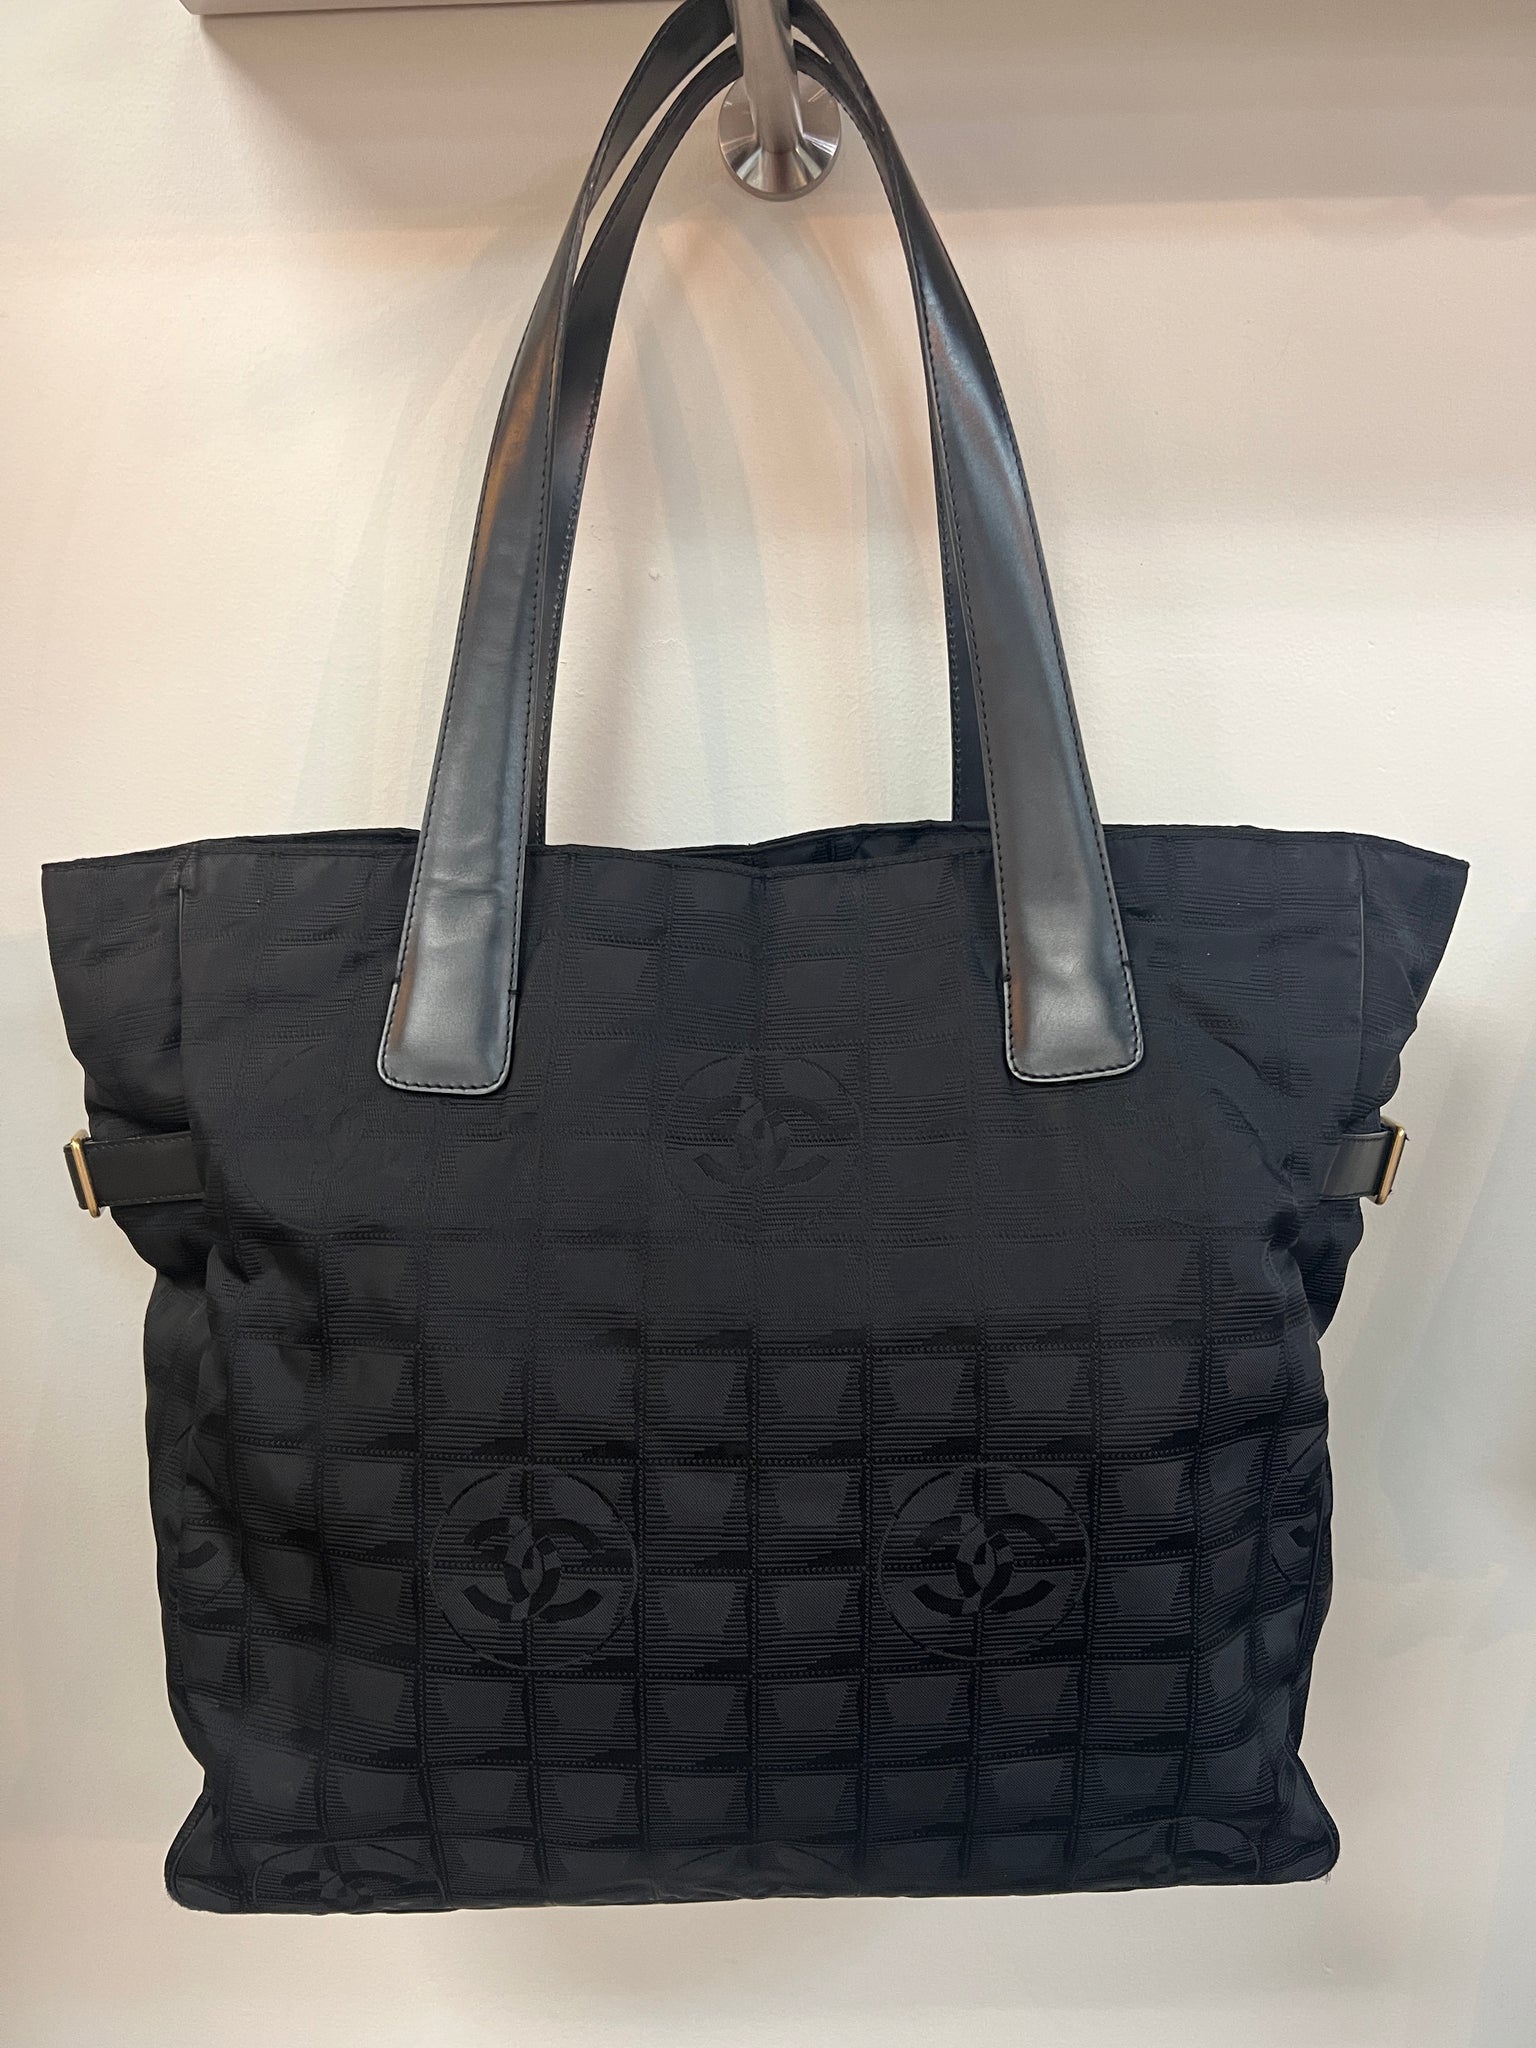 tote women chanel bag authentic